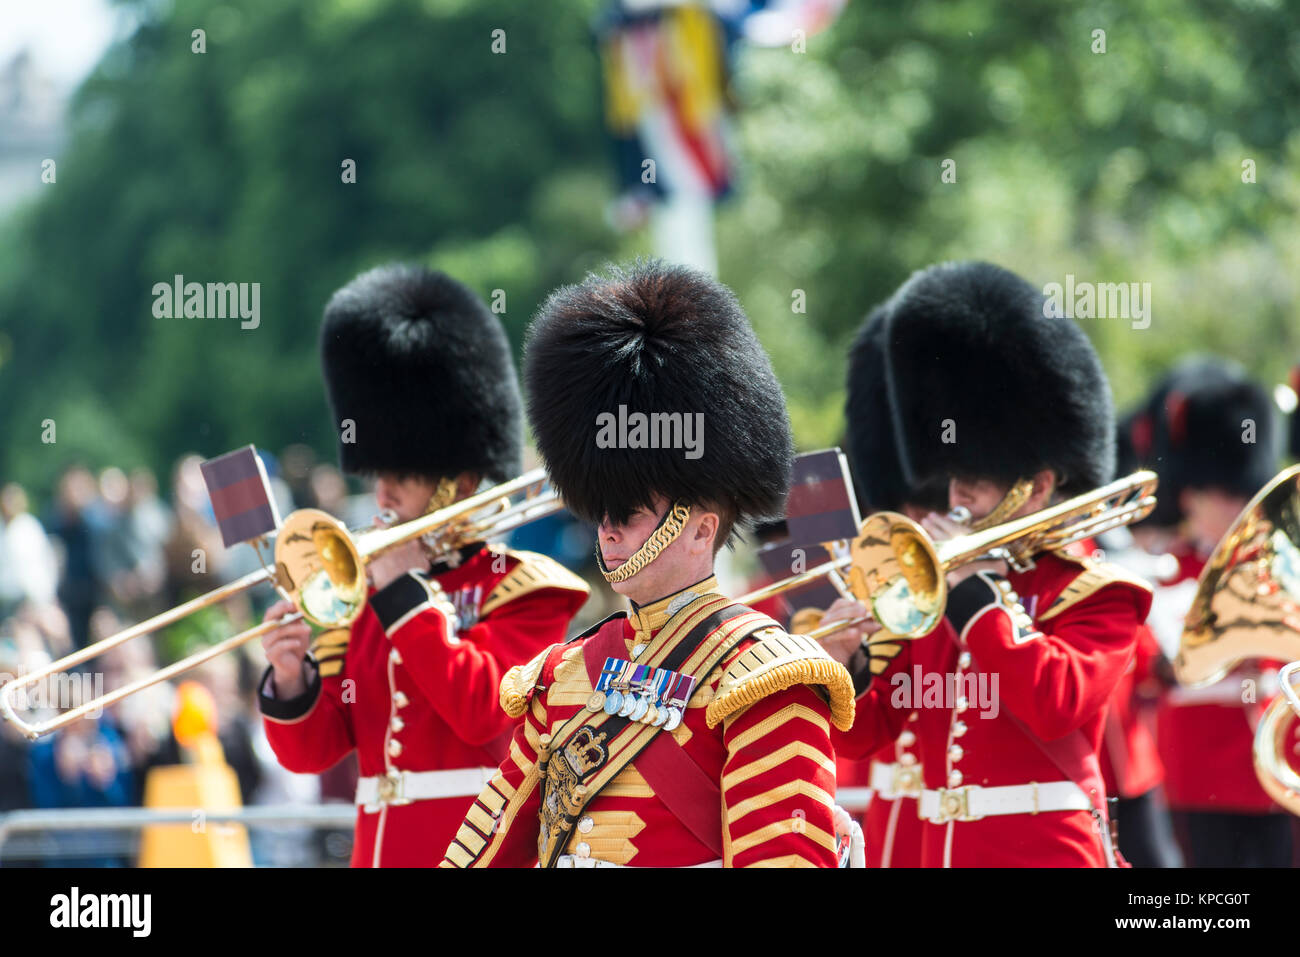 Brass band, guards of the royal guard with bearskin cap, Changing of the Guard, Traditional Changing, Buckingham Palace, London Stock Photo